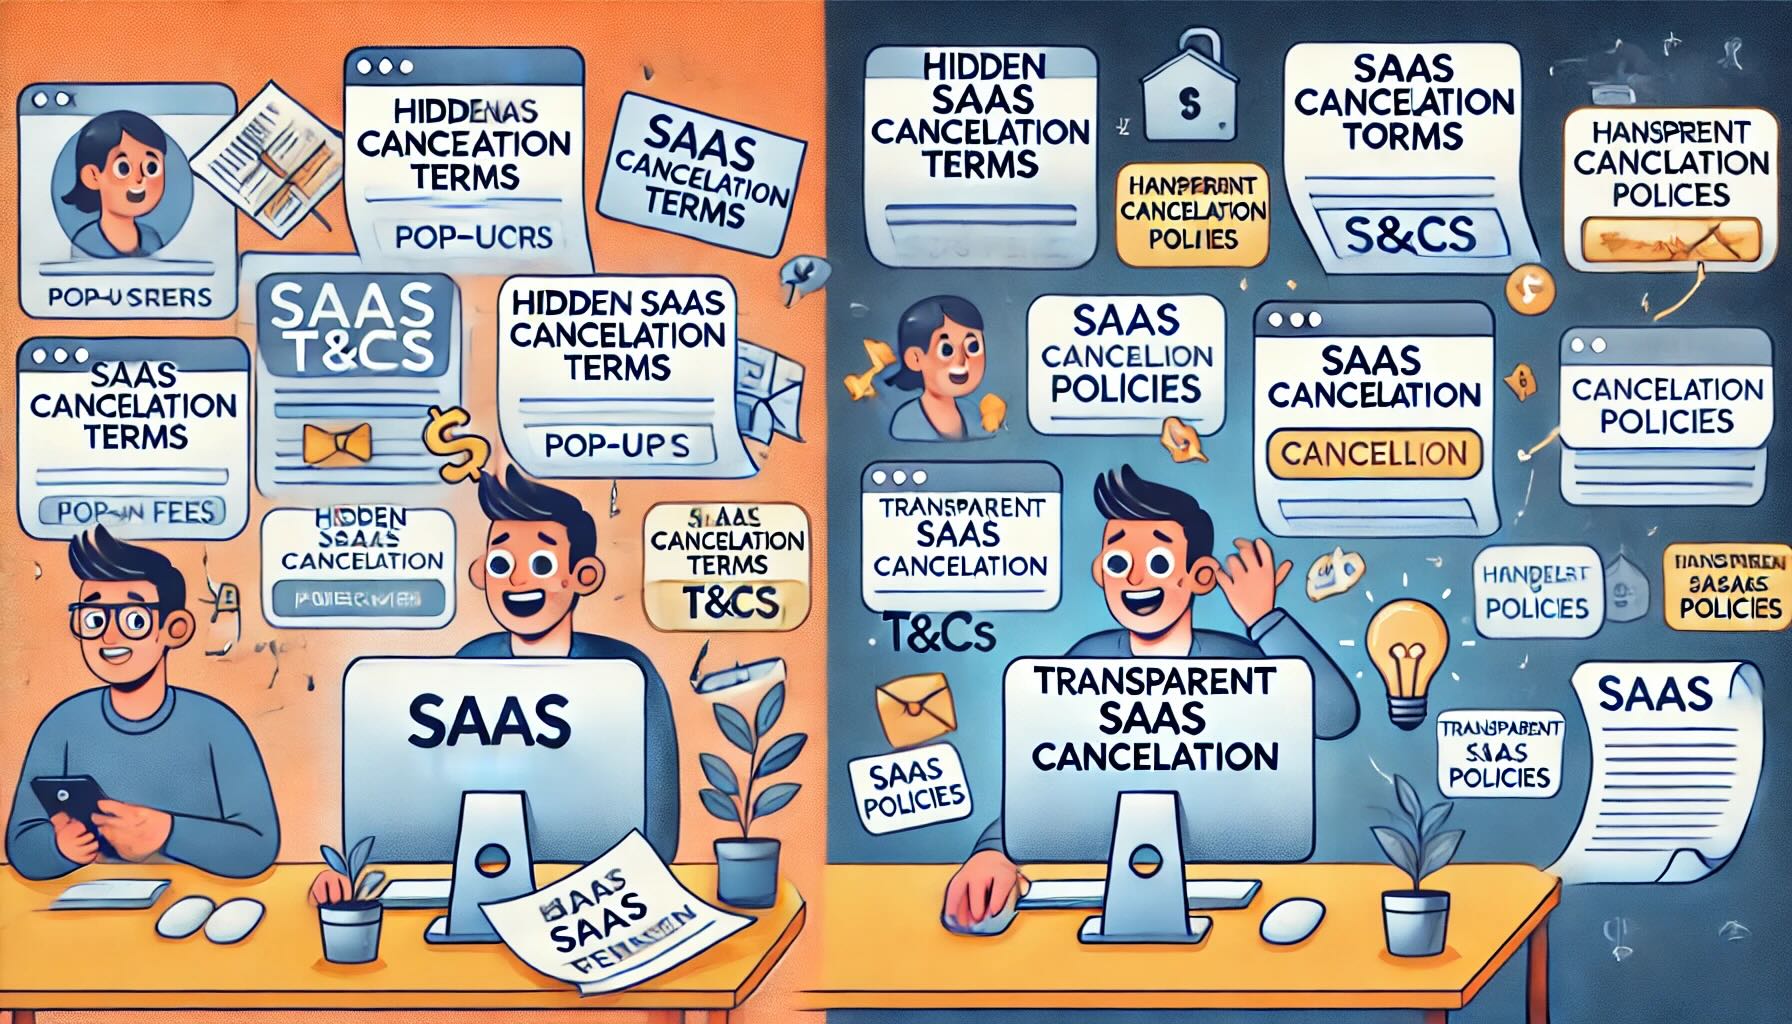 An illustration depicting a customer struggling with complex SaaS cancellation policies. The image should show a customer at a computer, frustrated with SaaS cancellation policies